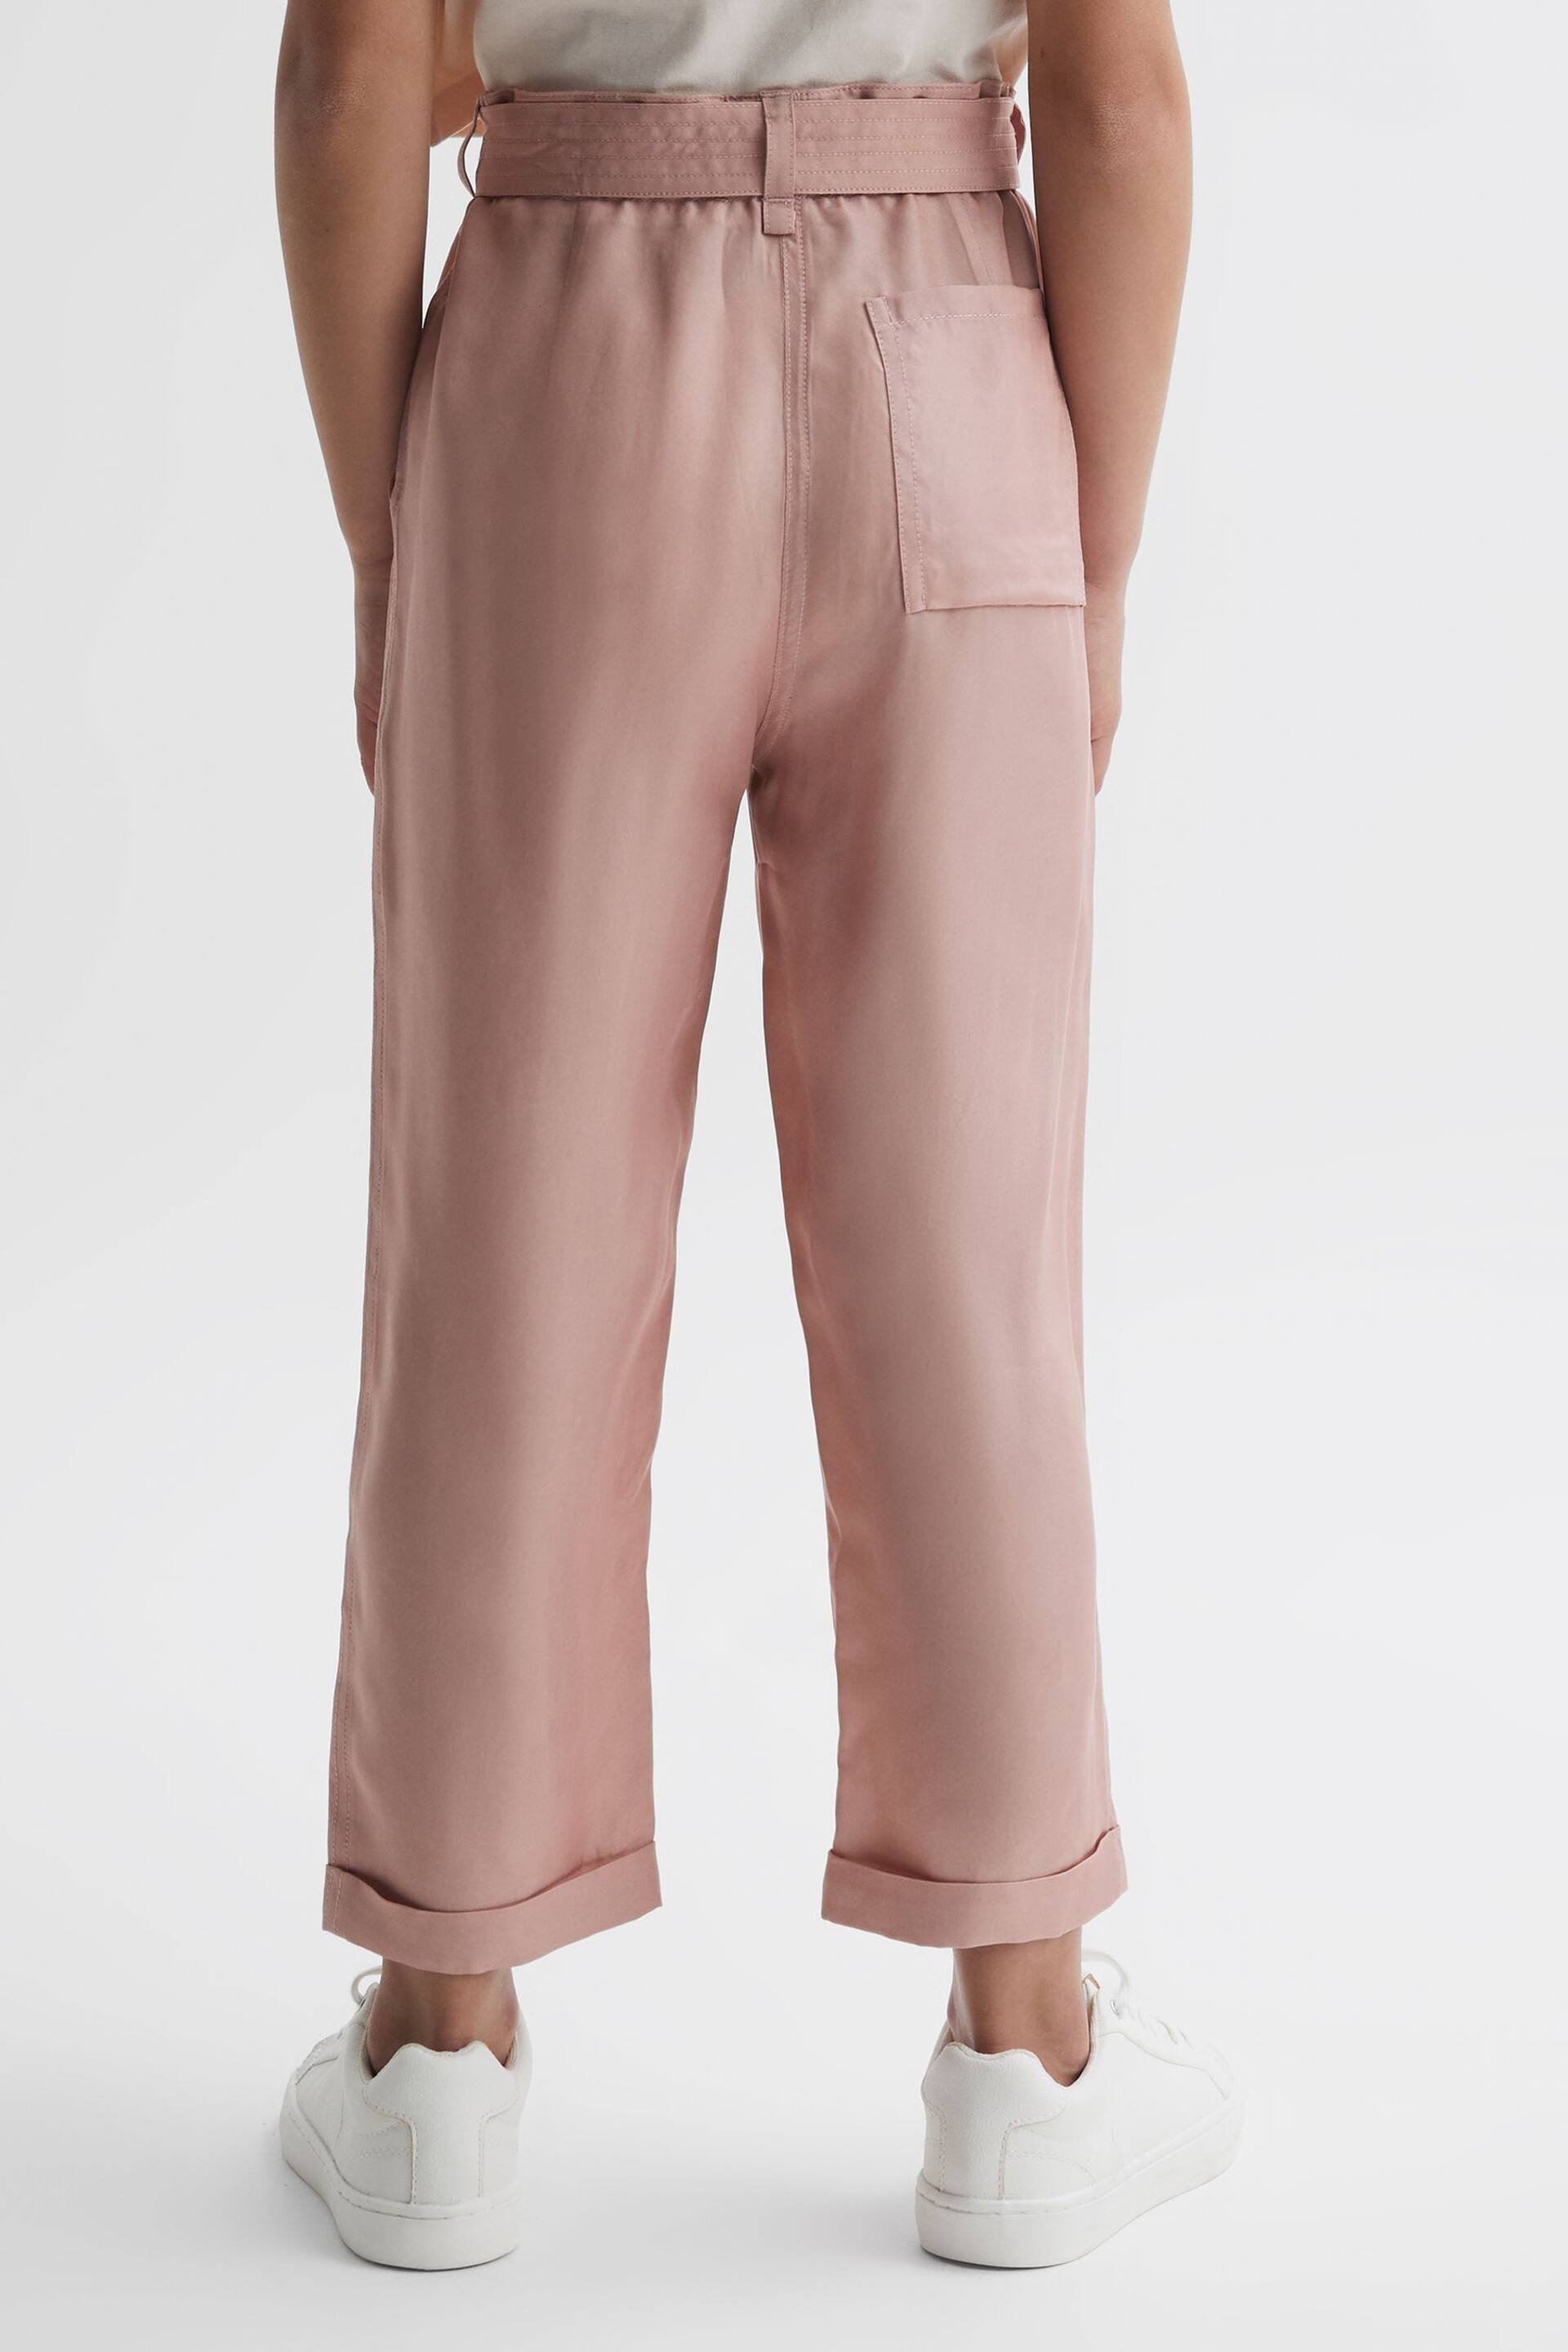 Reiss Pink Joanie Senior Paper Bag Cargo Trousers - Image 4 of 5